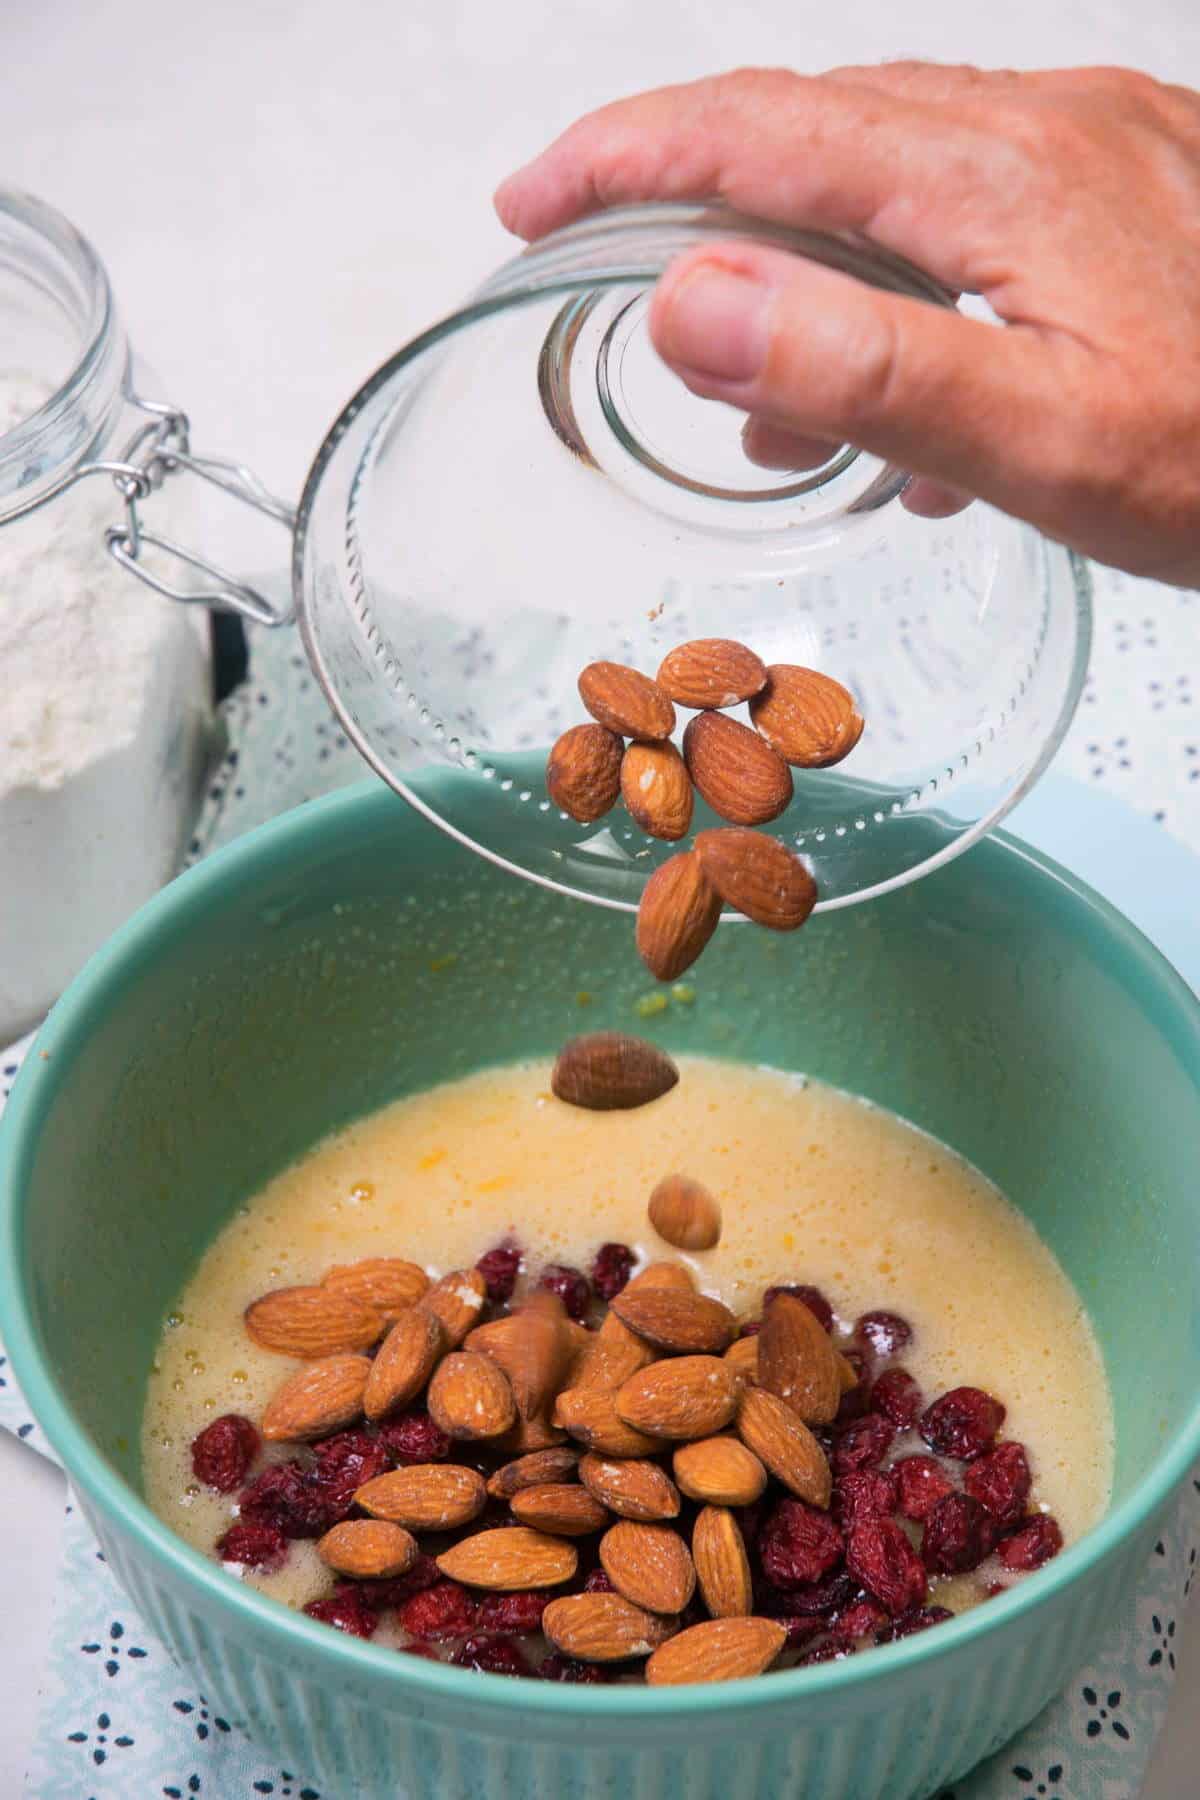 Almonds, cranberries and biscotti wet ingredients in green bowl.